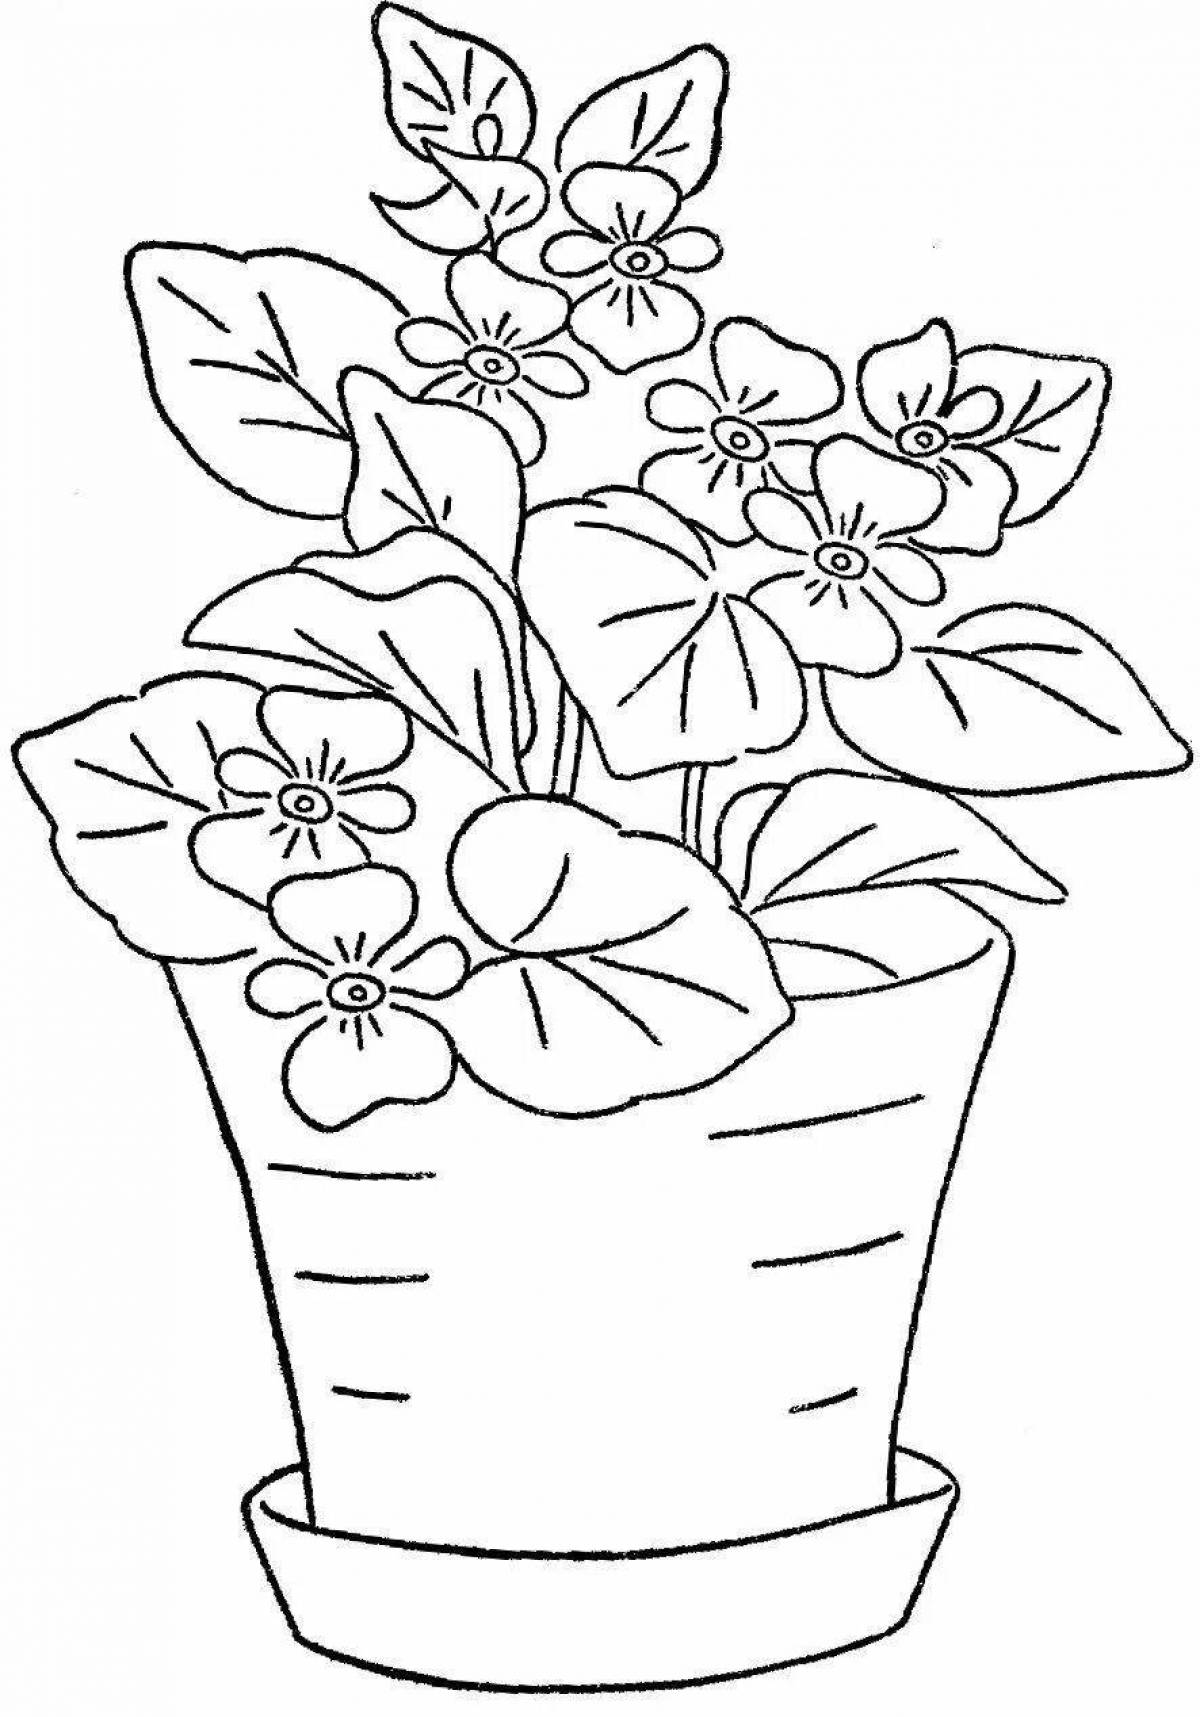 Cute flower in a pot for 3-4 year olds